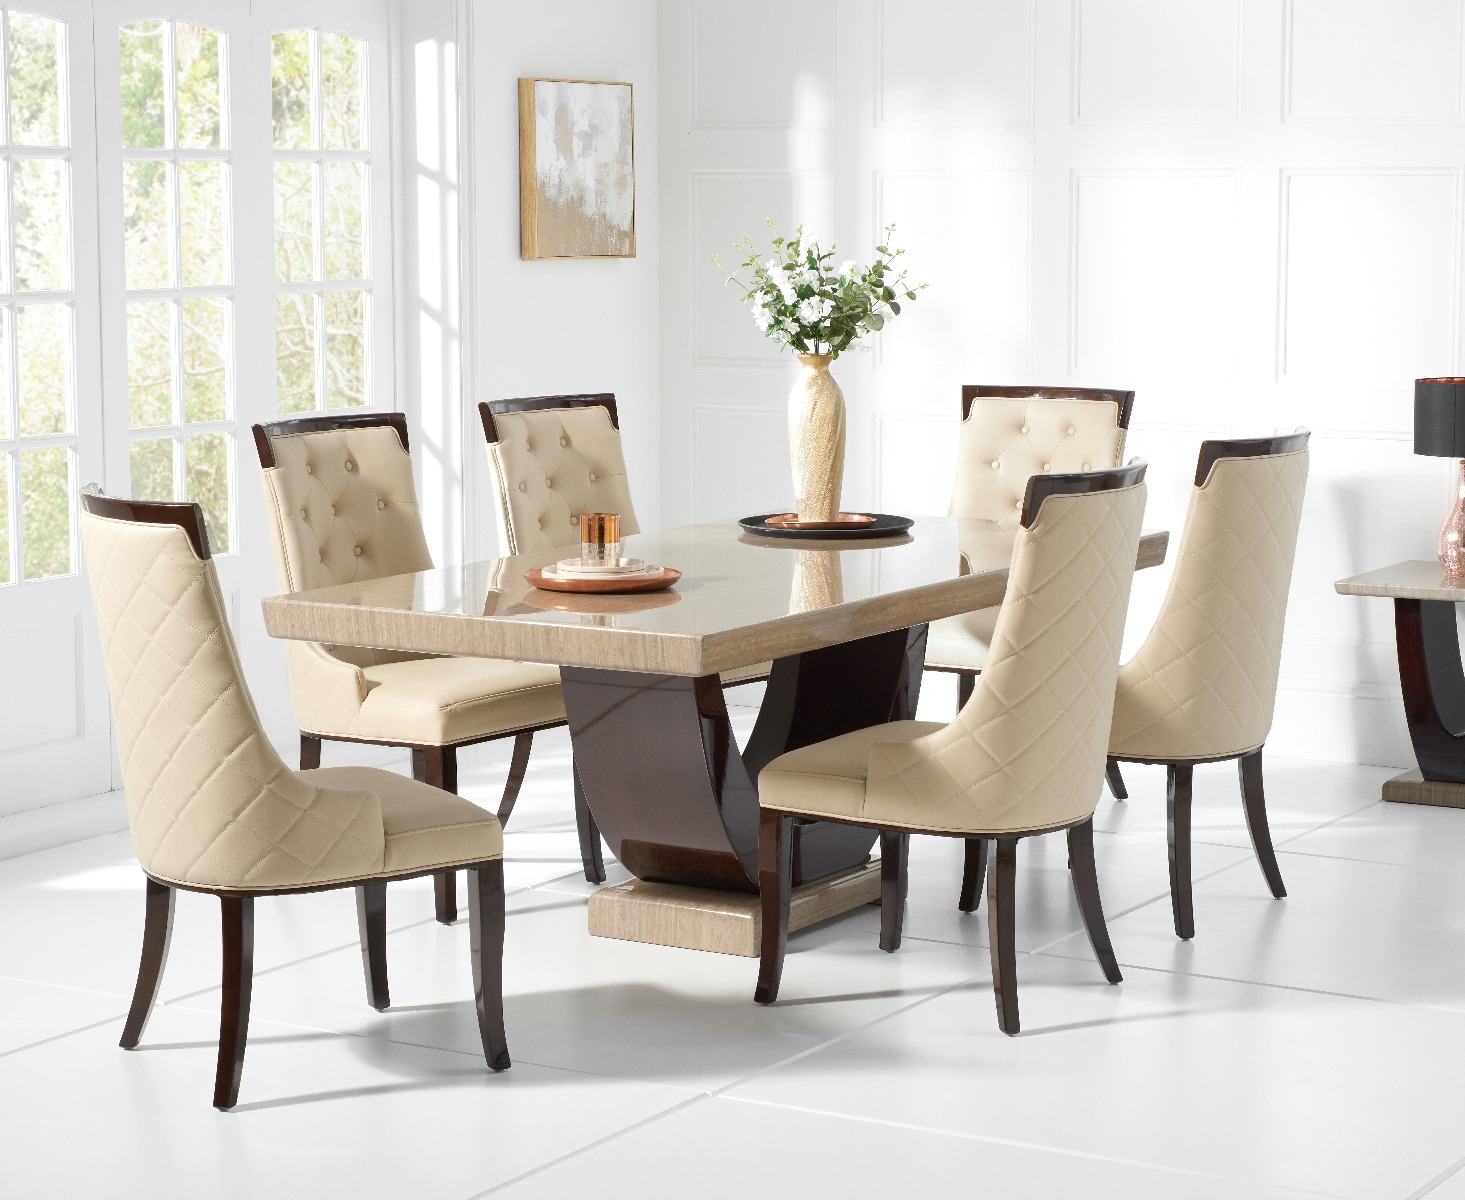 Novara 170cm Brown Pedestal Marble Dining Table With 4 Grey Francesca Chairs